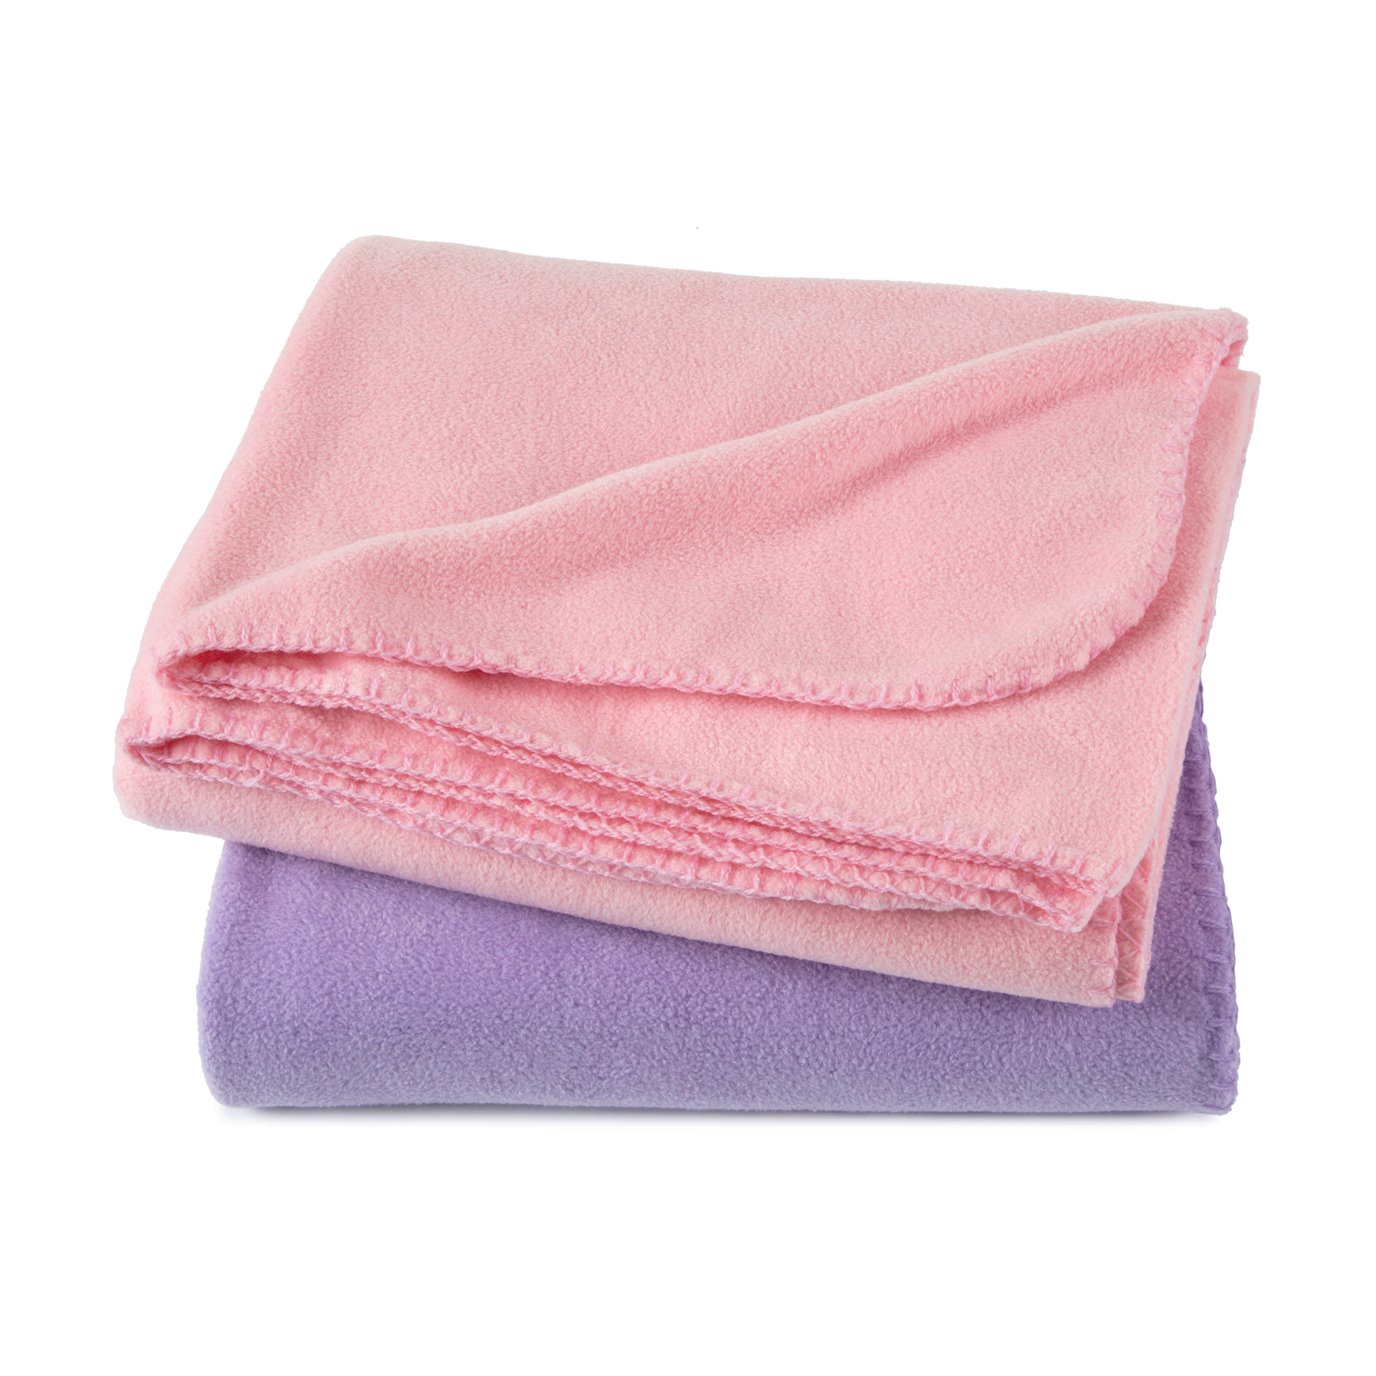 Martex 2-Pack Purple and Pink Throw Set